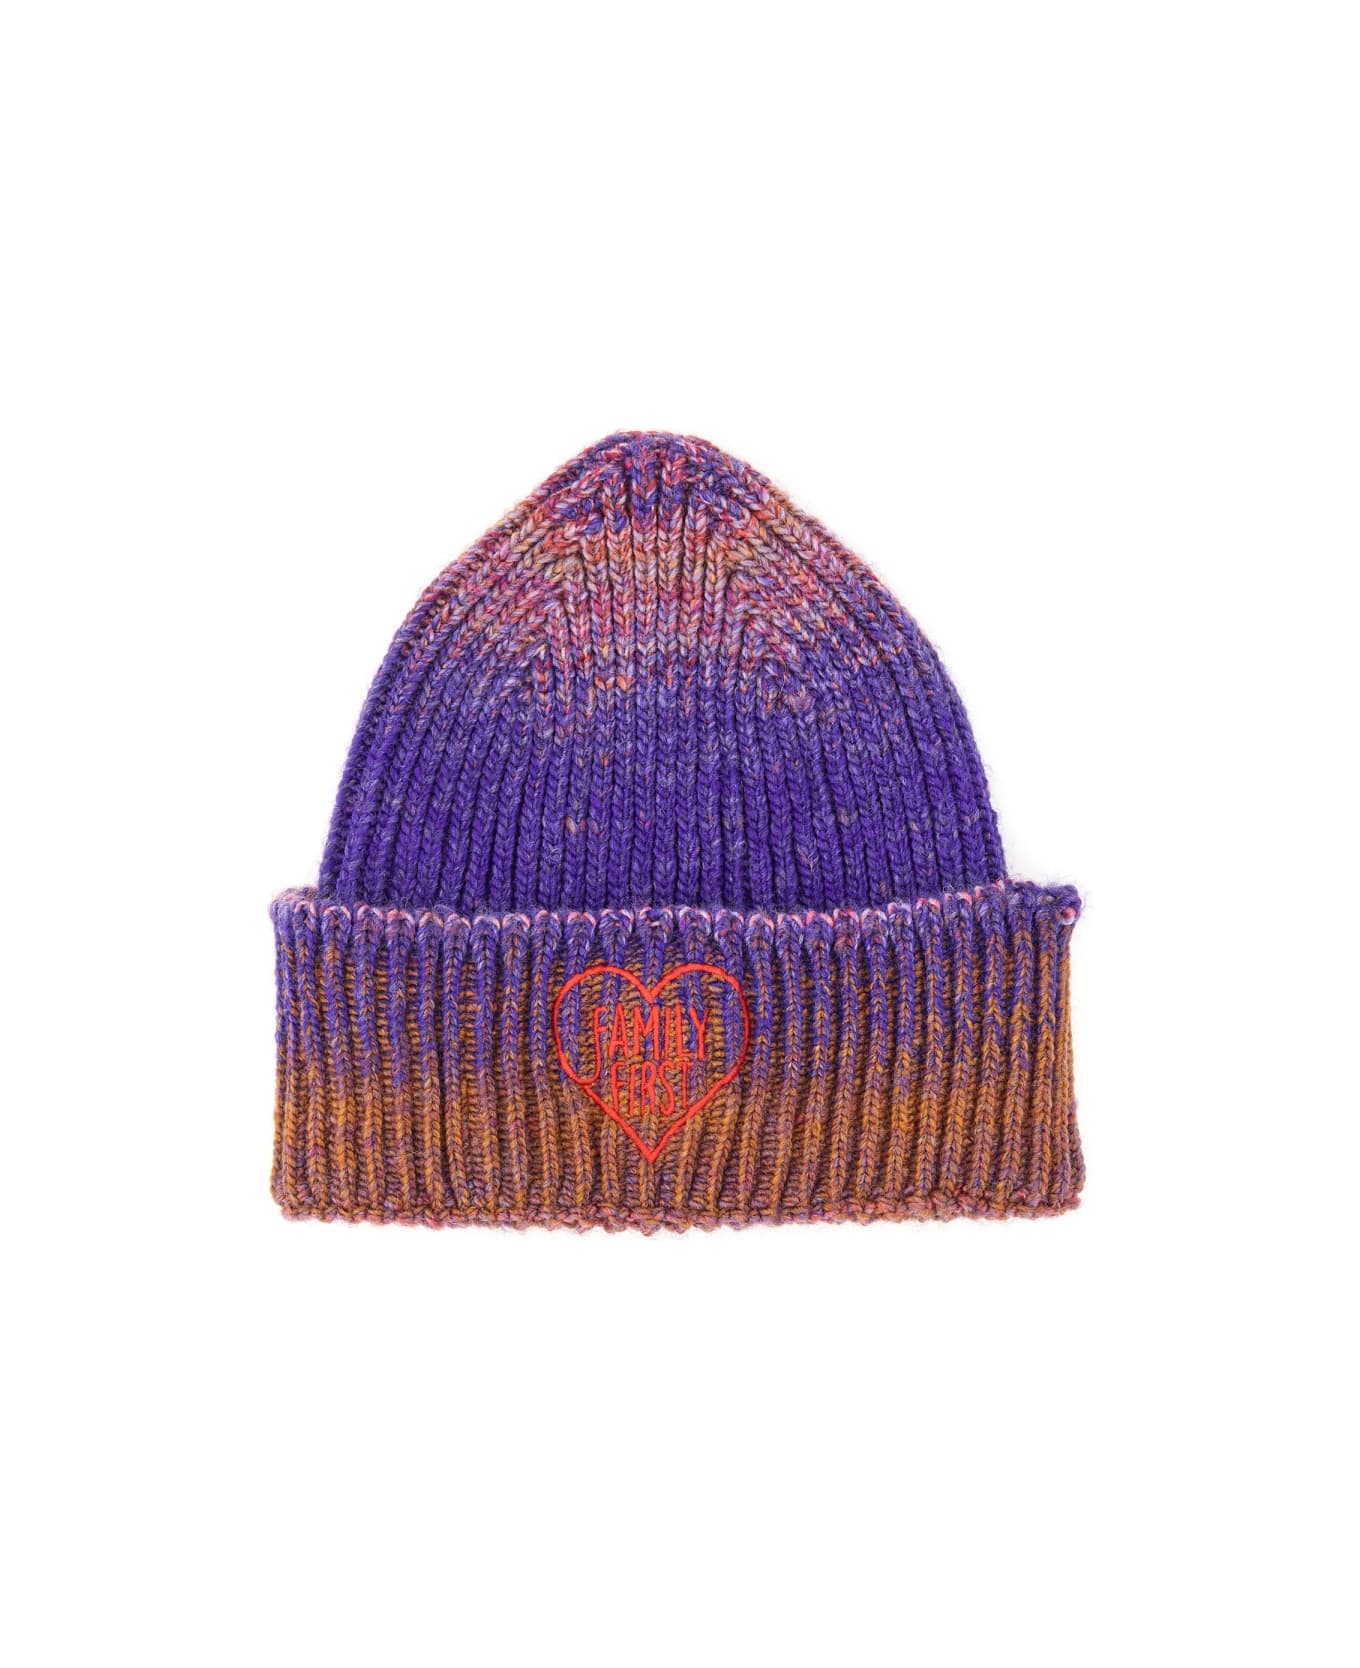 Family First Milano Beanie Hat - PURPLE